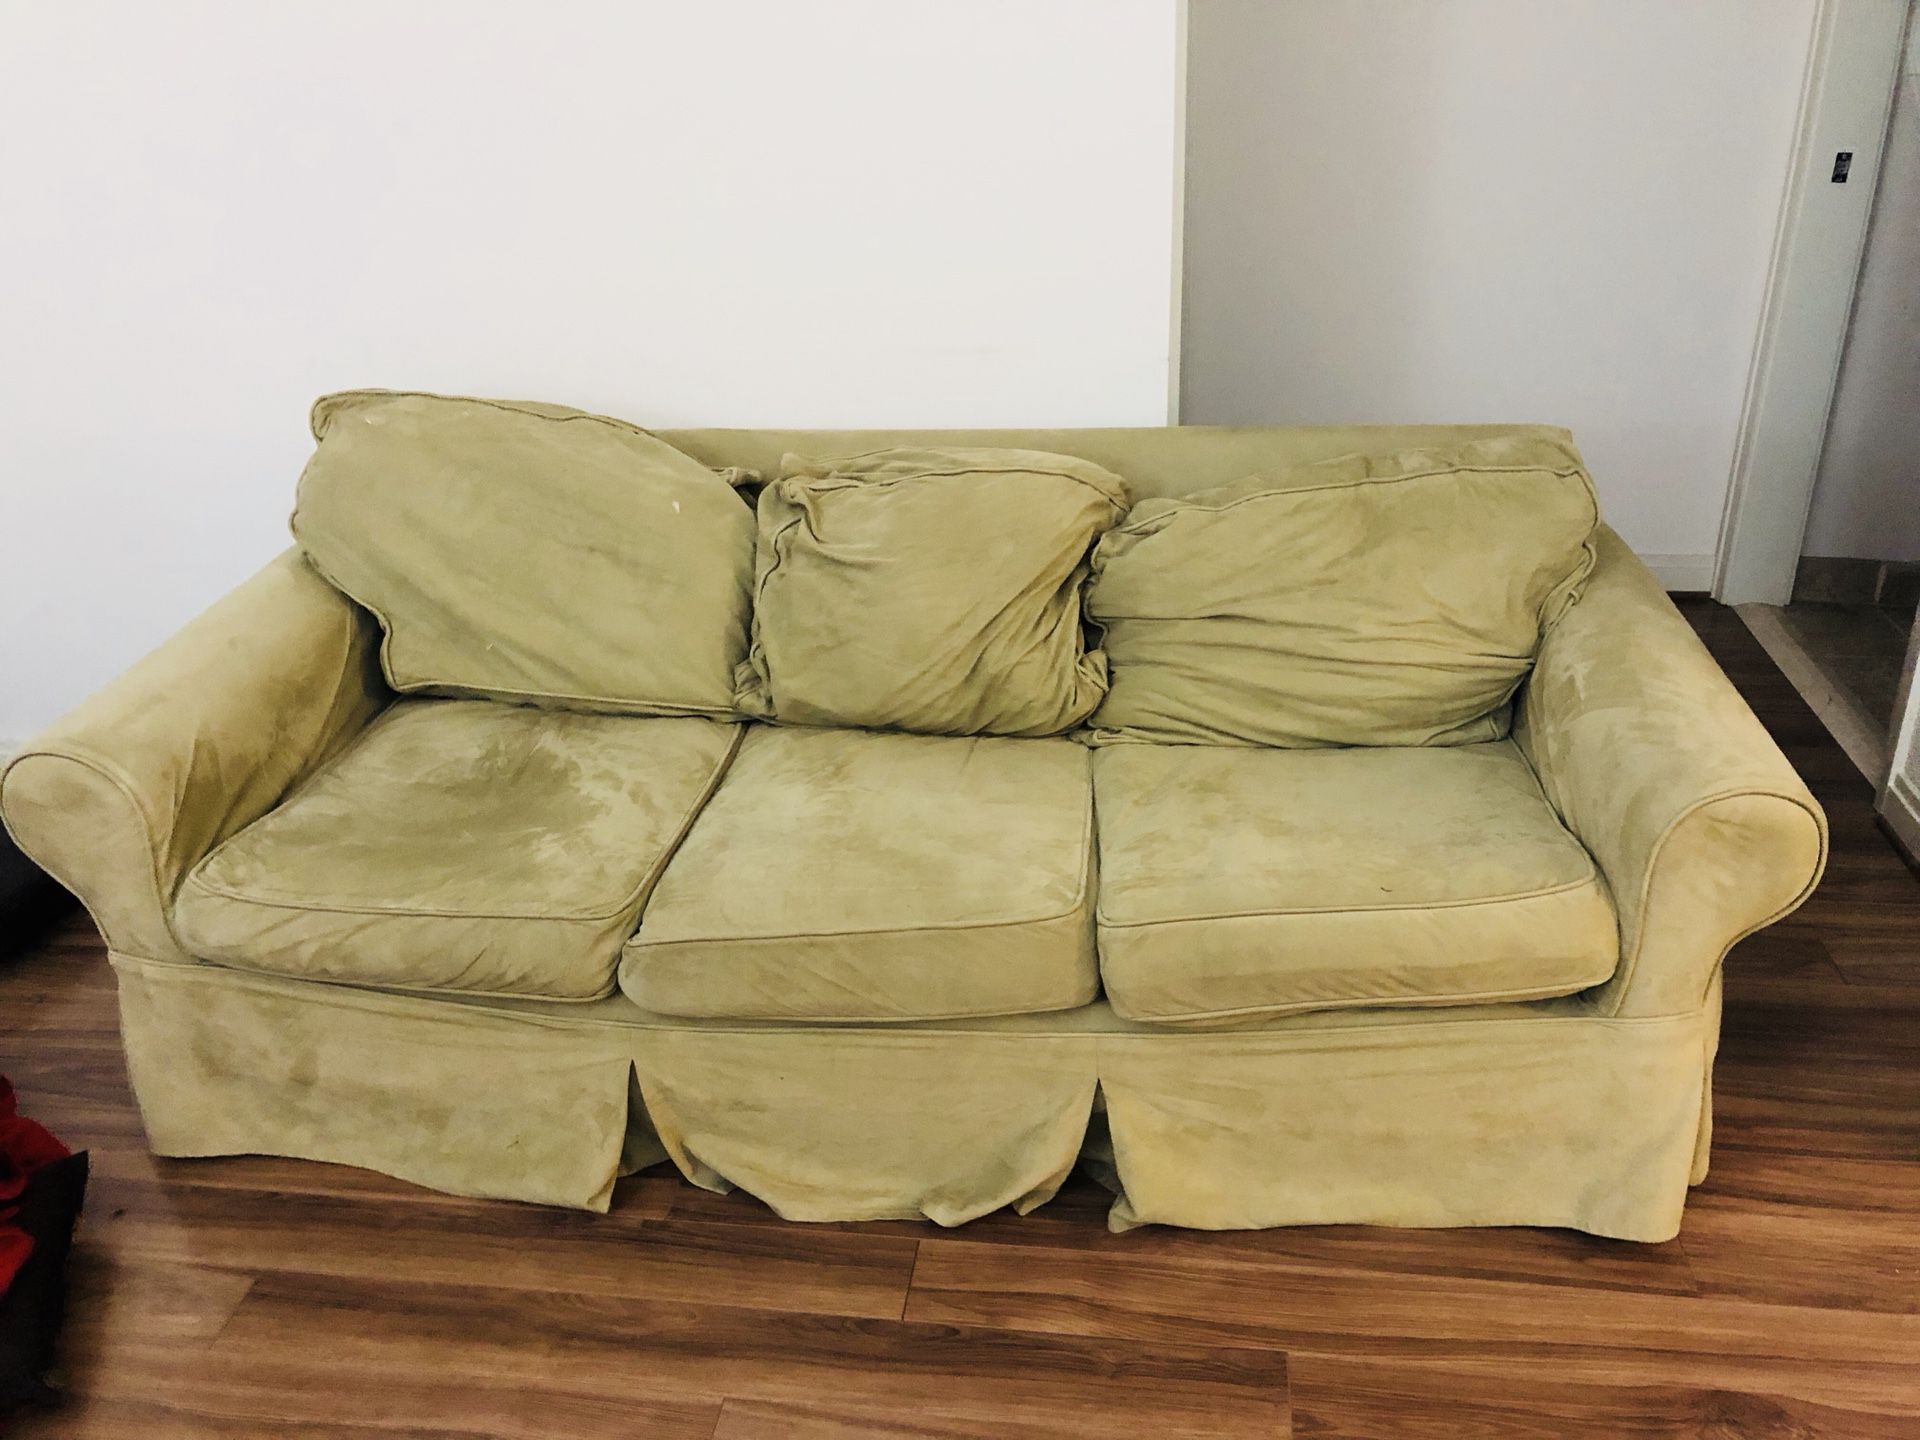 Free couch, washable covers. Good overall condition but some cosmetic defects. Very comfortable. I cannot deliver. Thanks.